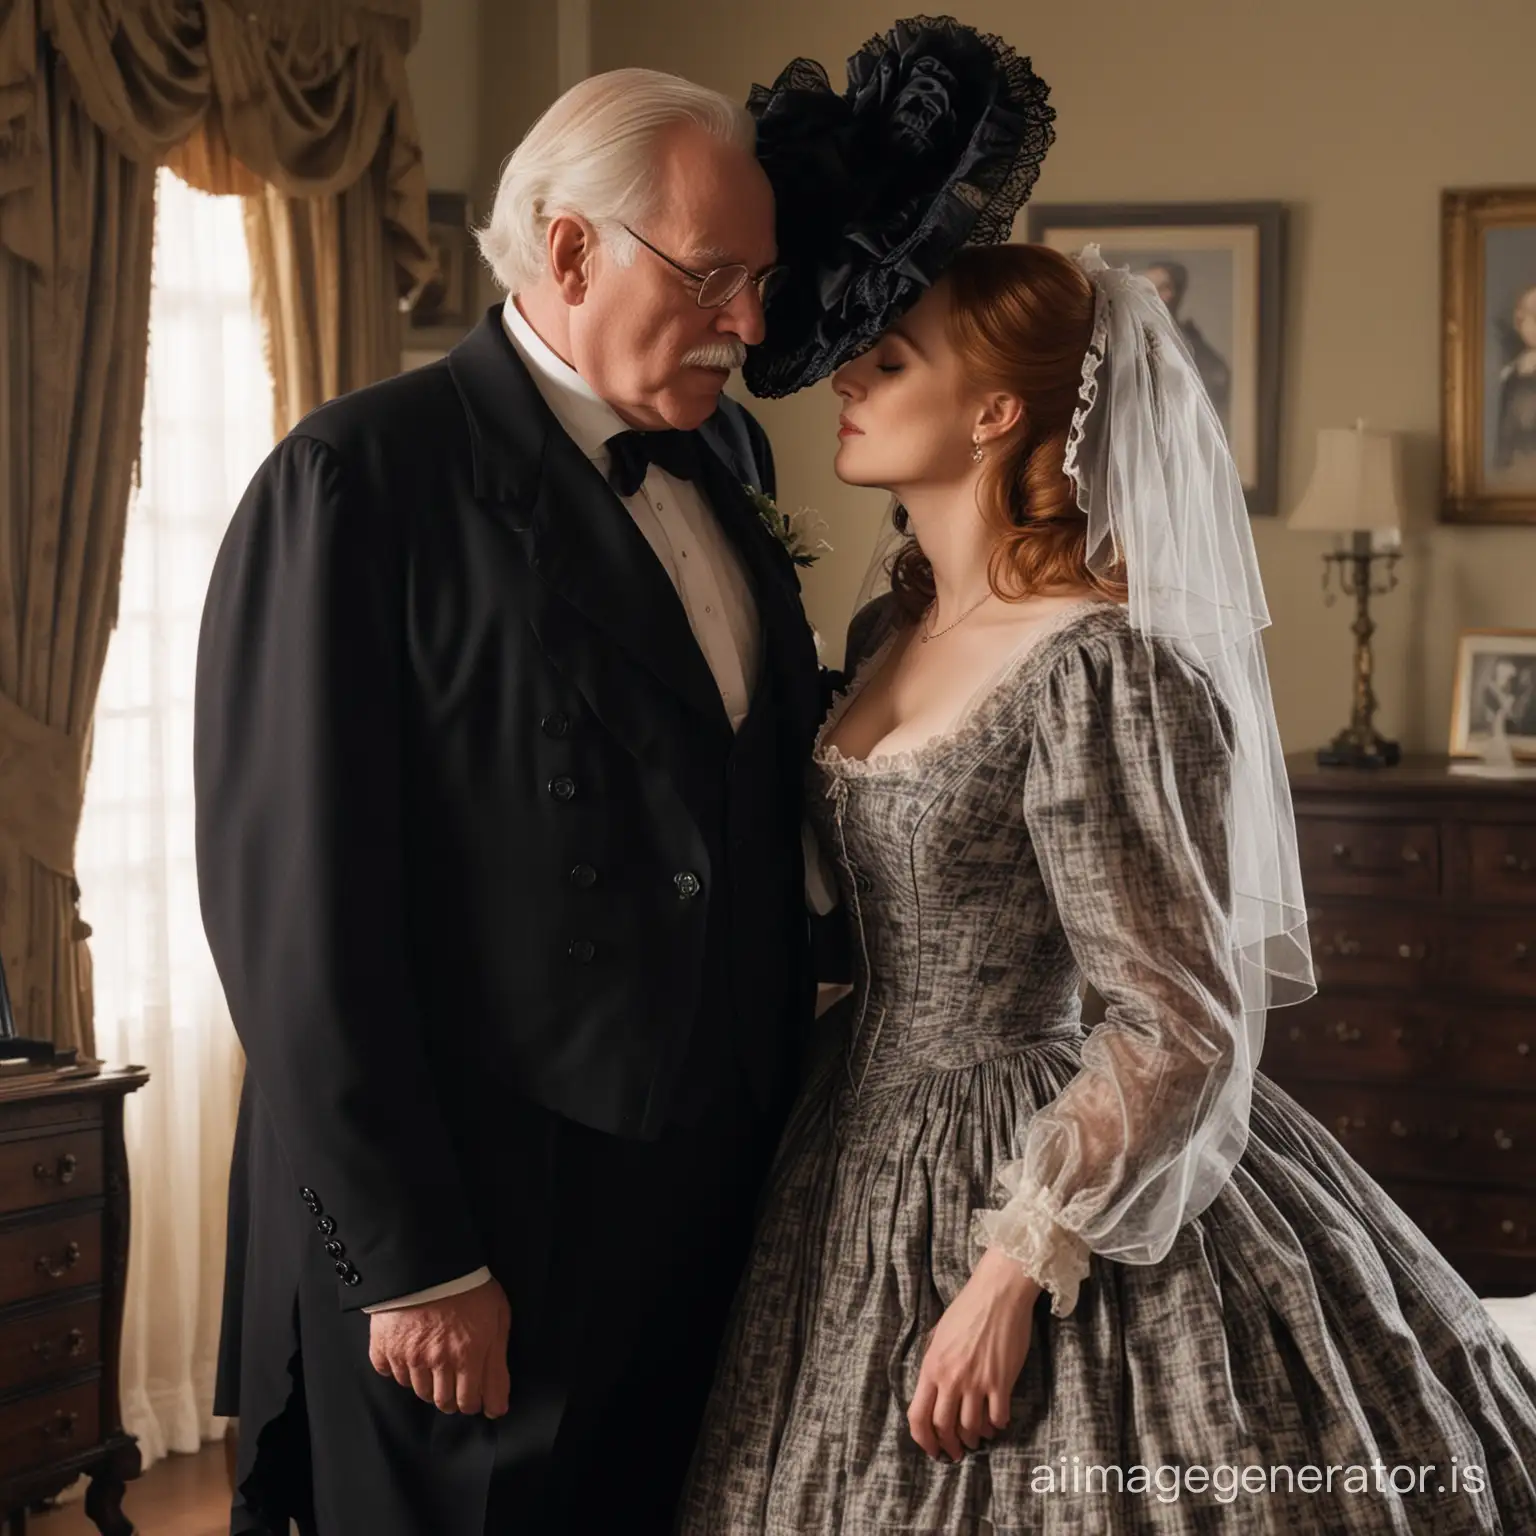 Dana Scully wearing a black floor-length loose billowing 1860 victorian poofy crinoline dress with  a frilly bonnet kissing an old man who seems to be her newlywed husband